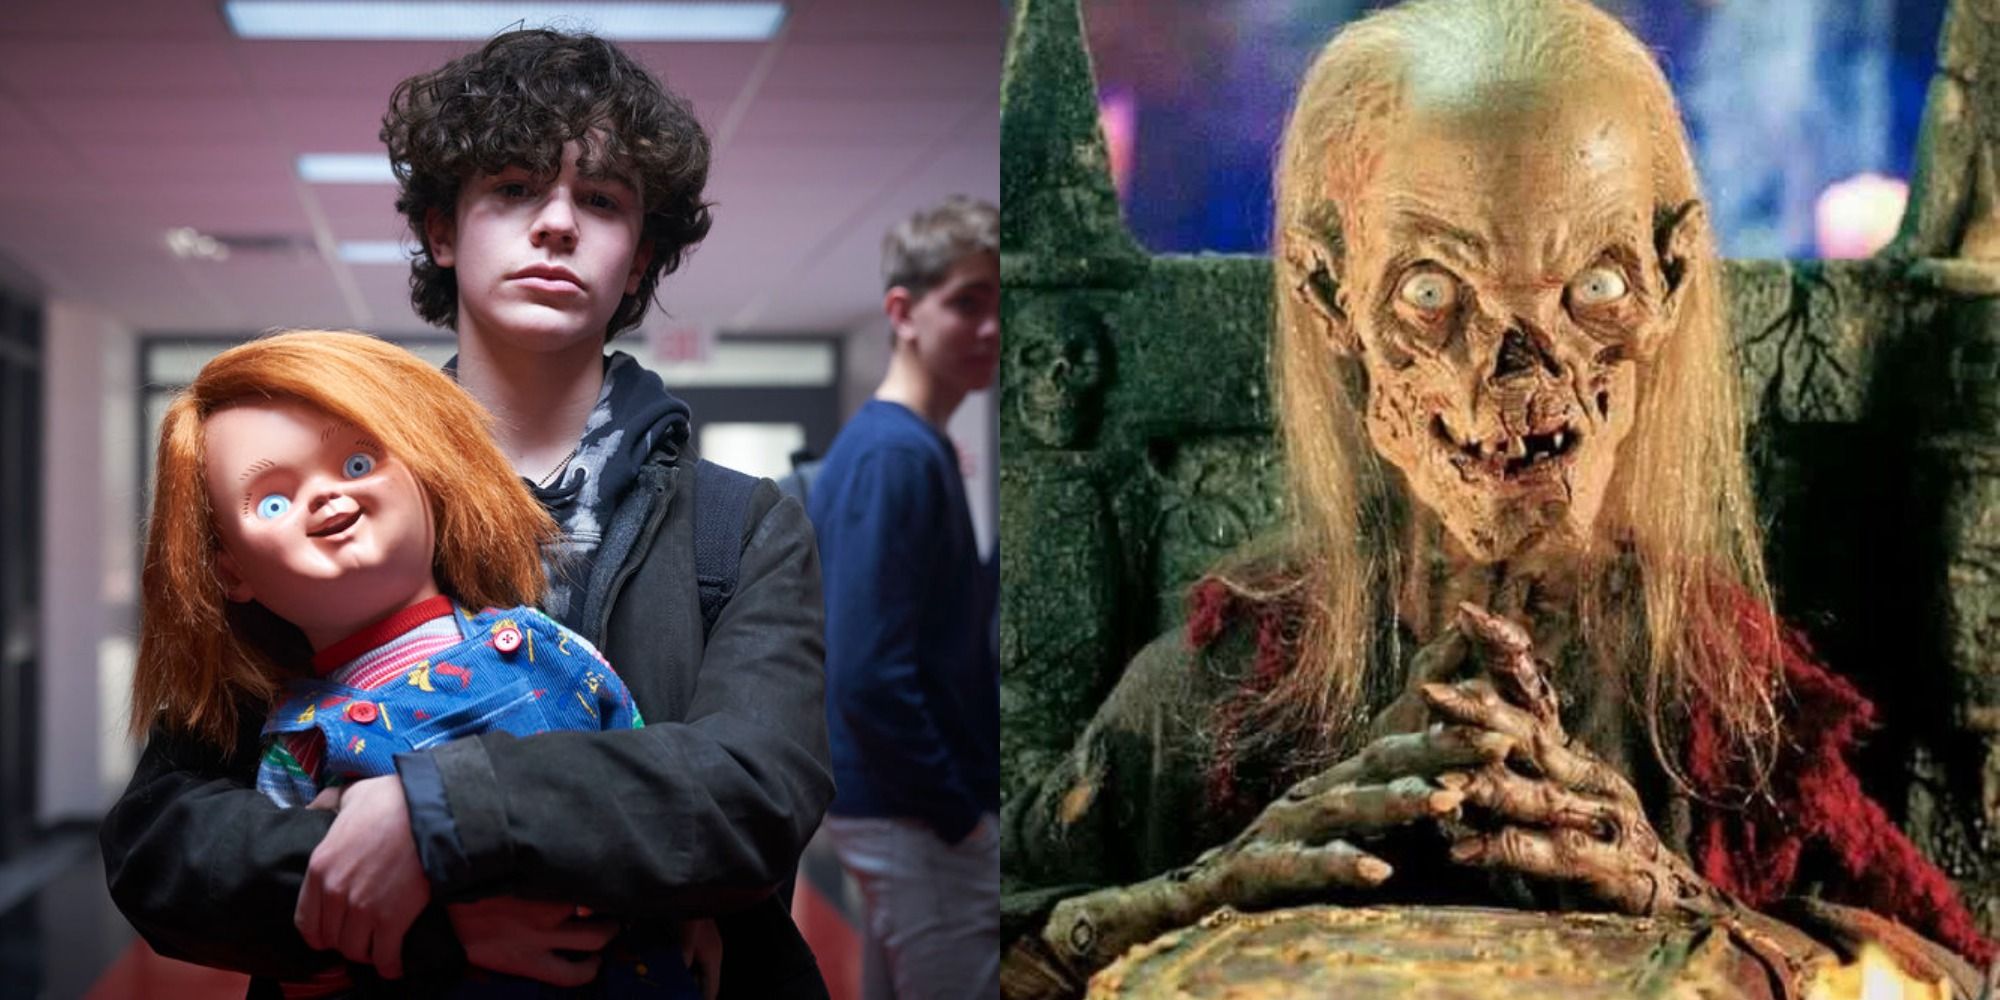 Split image showing Jake holding CHucky, and the Cyptkeeper from Tales from the Crypt